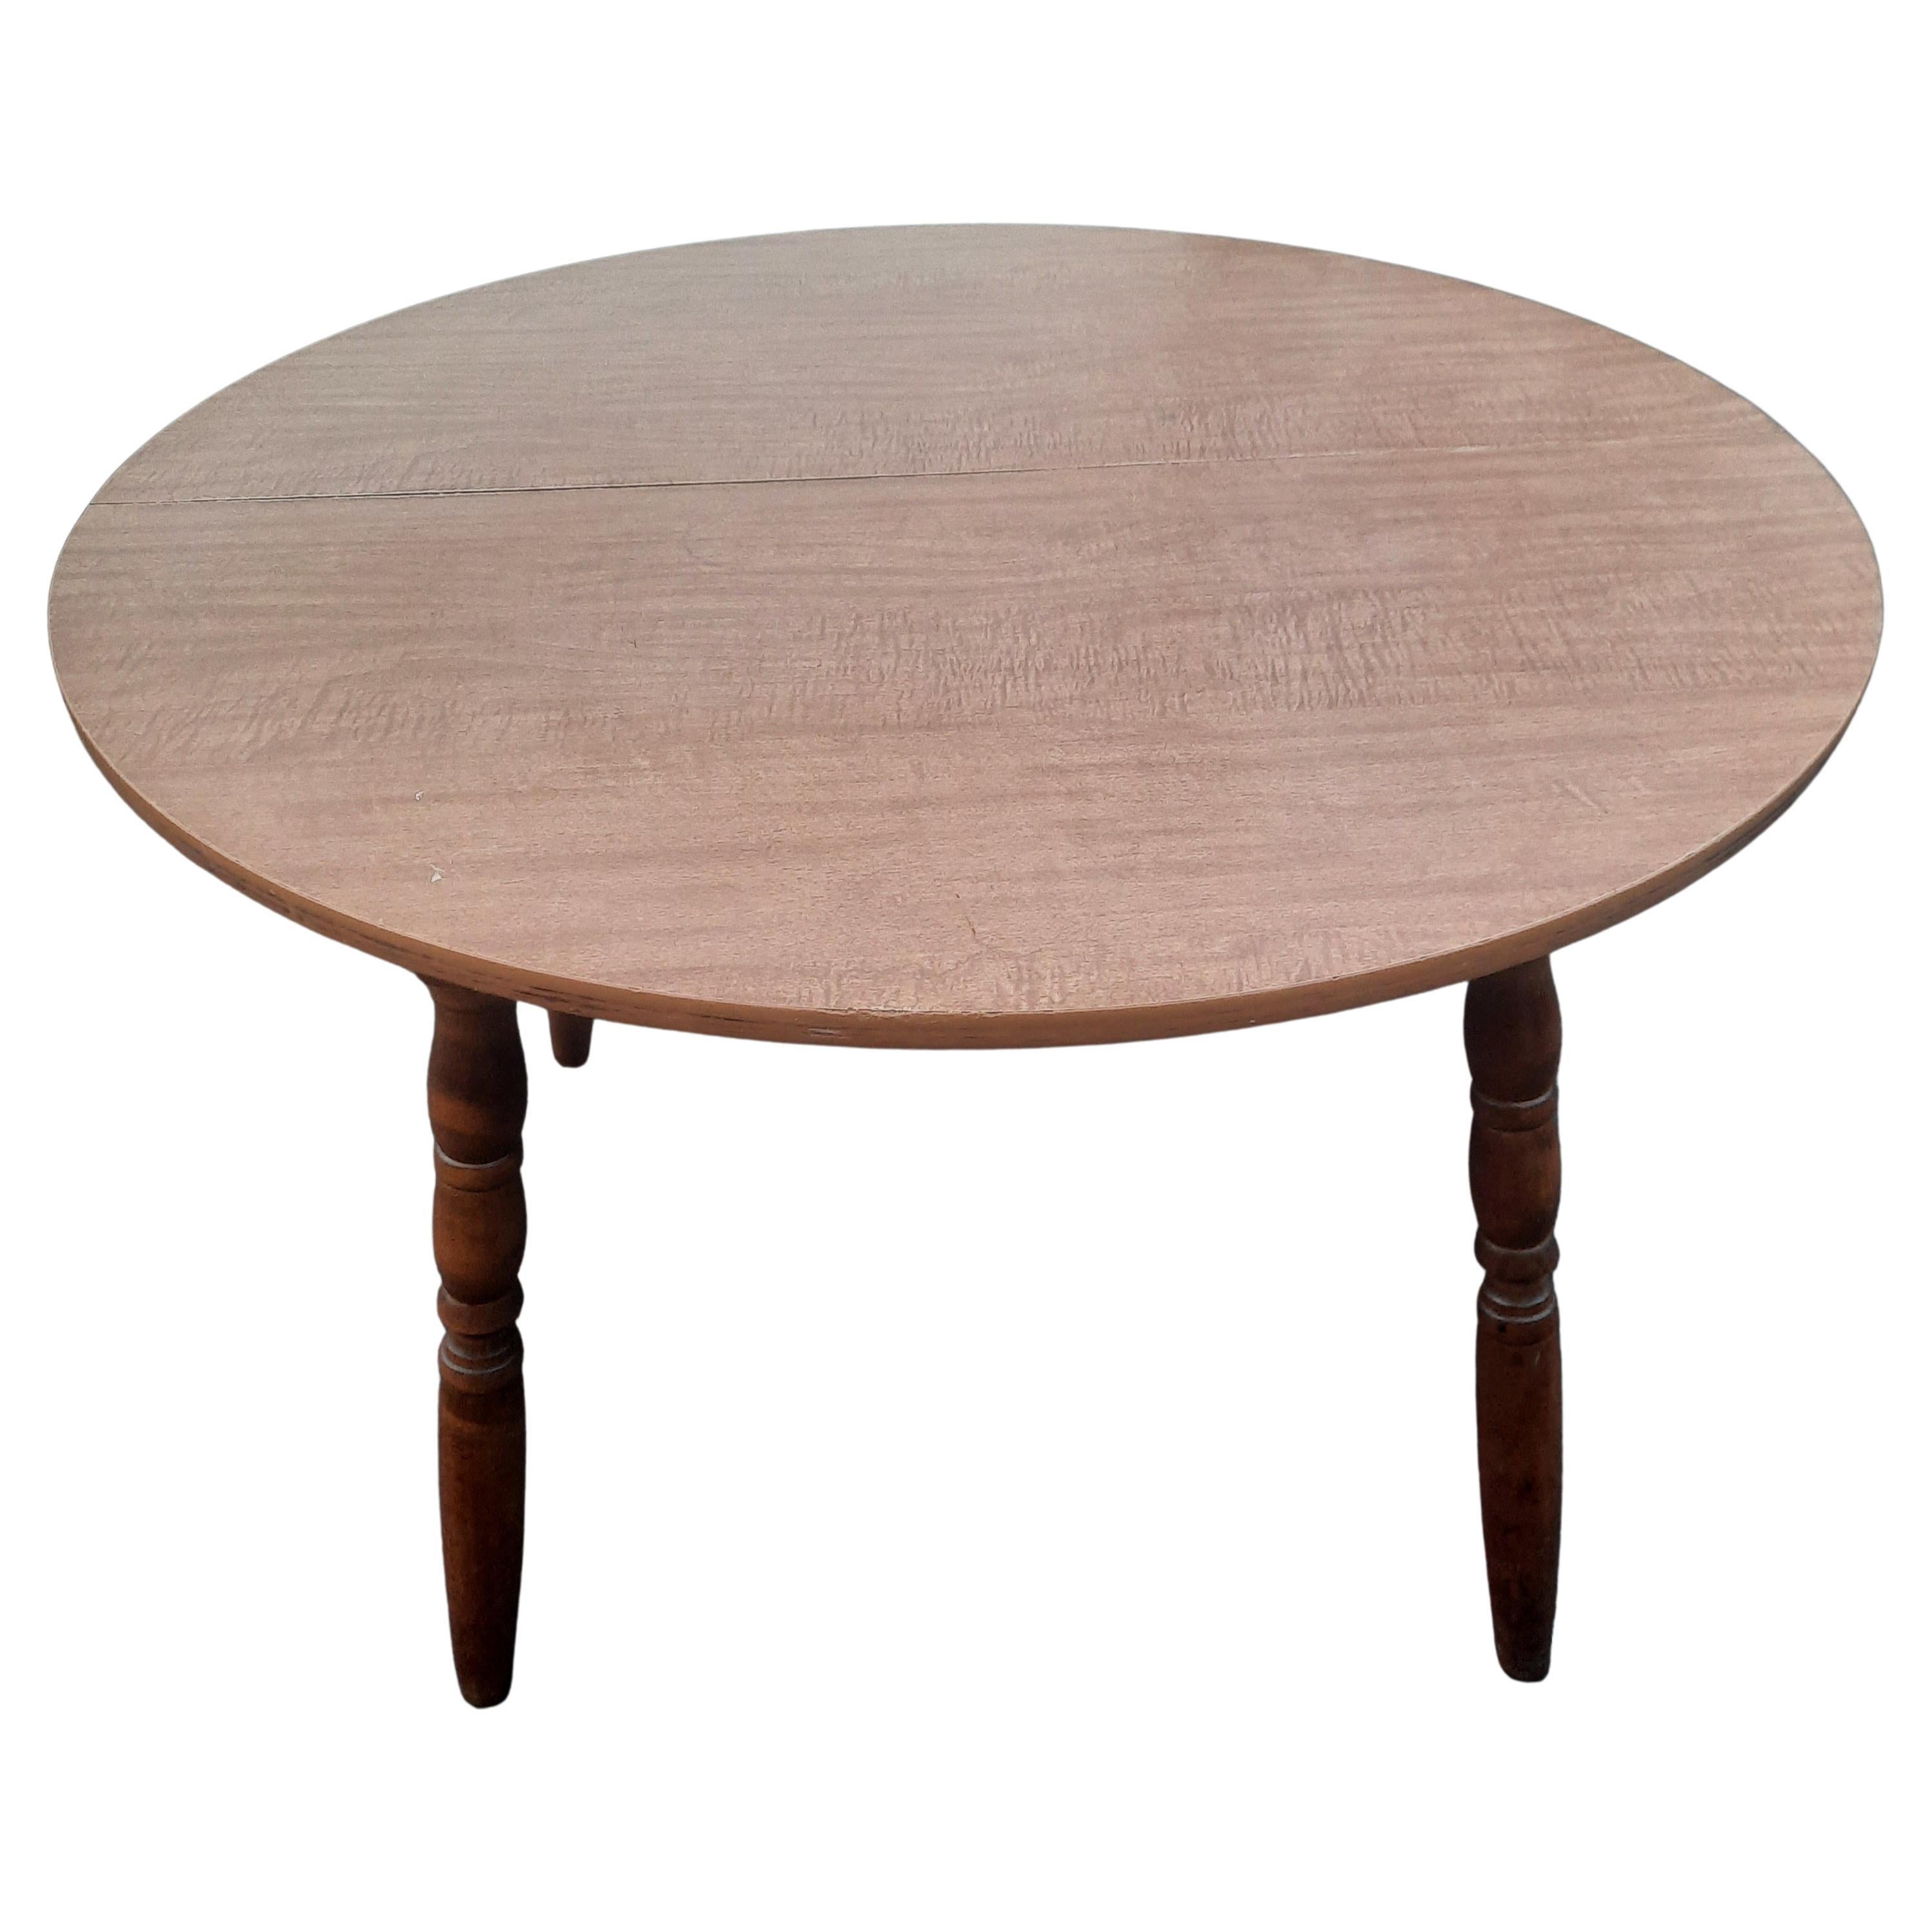 Mid-Century Modern Ethan Allen Maple Formica Top Round Table with Leaf, circa 1960s